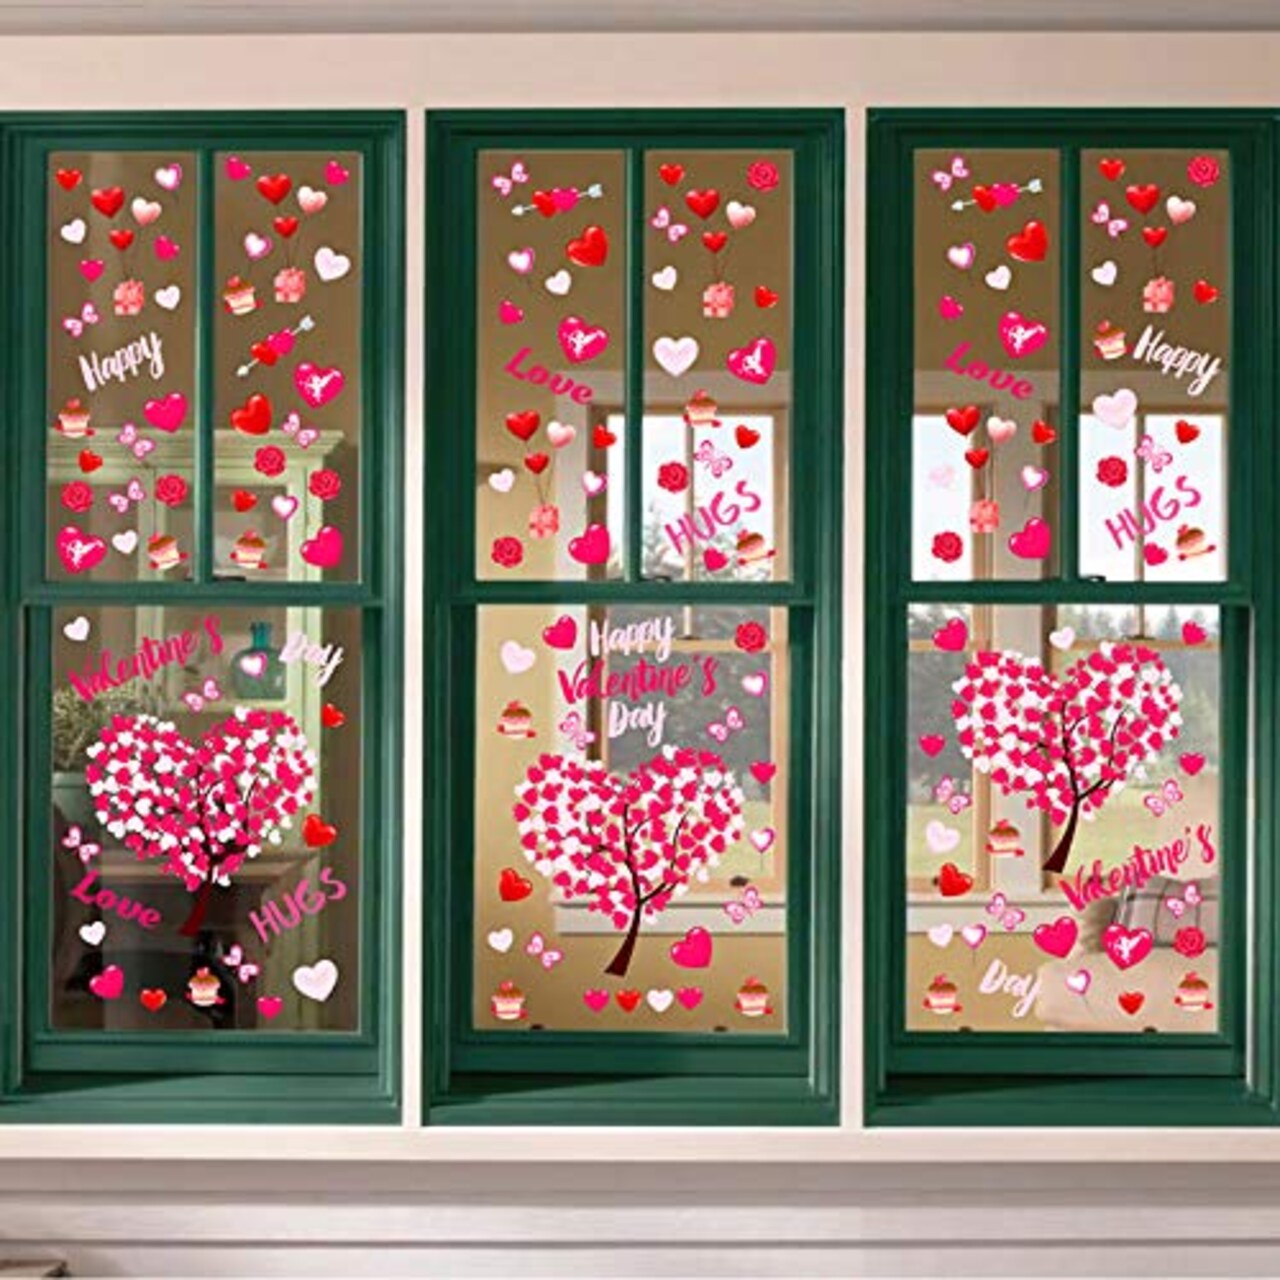 Ivenf Valentines Day Decorations Heart Window Clings Decor, Large